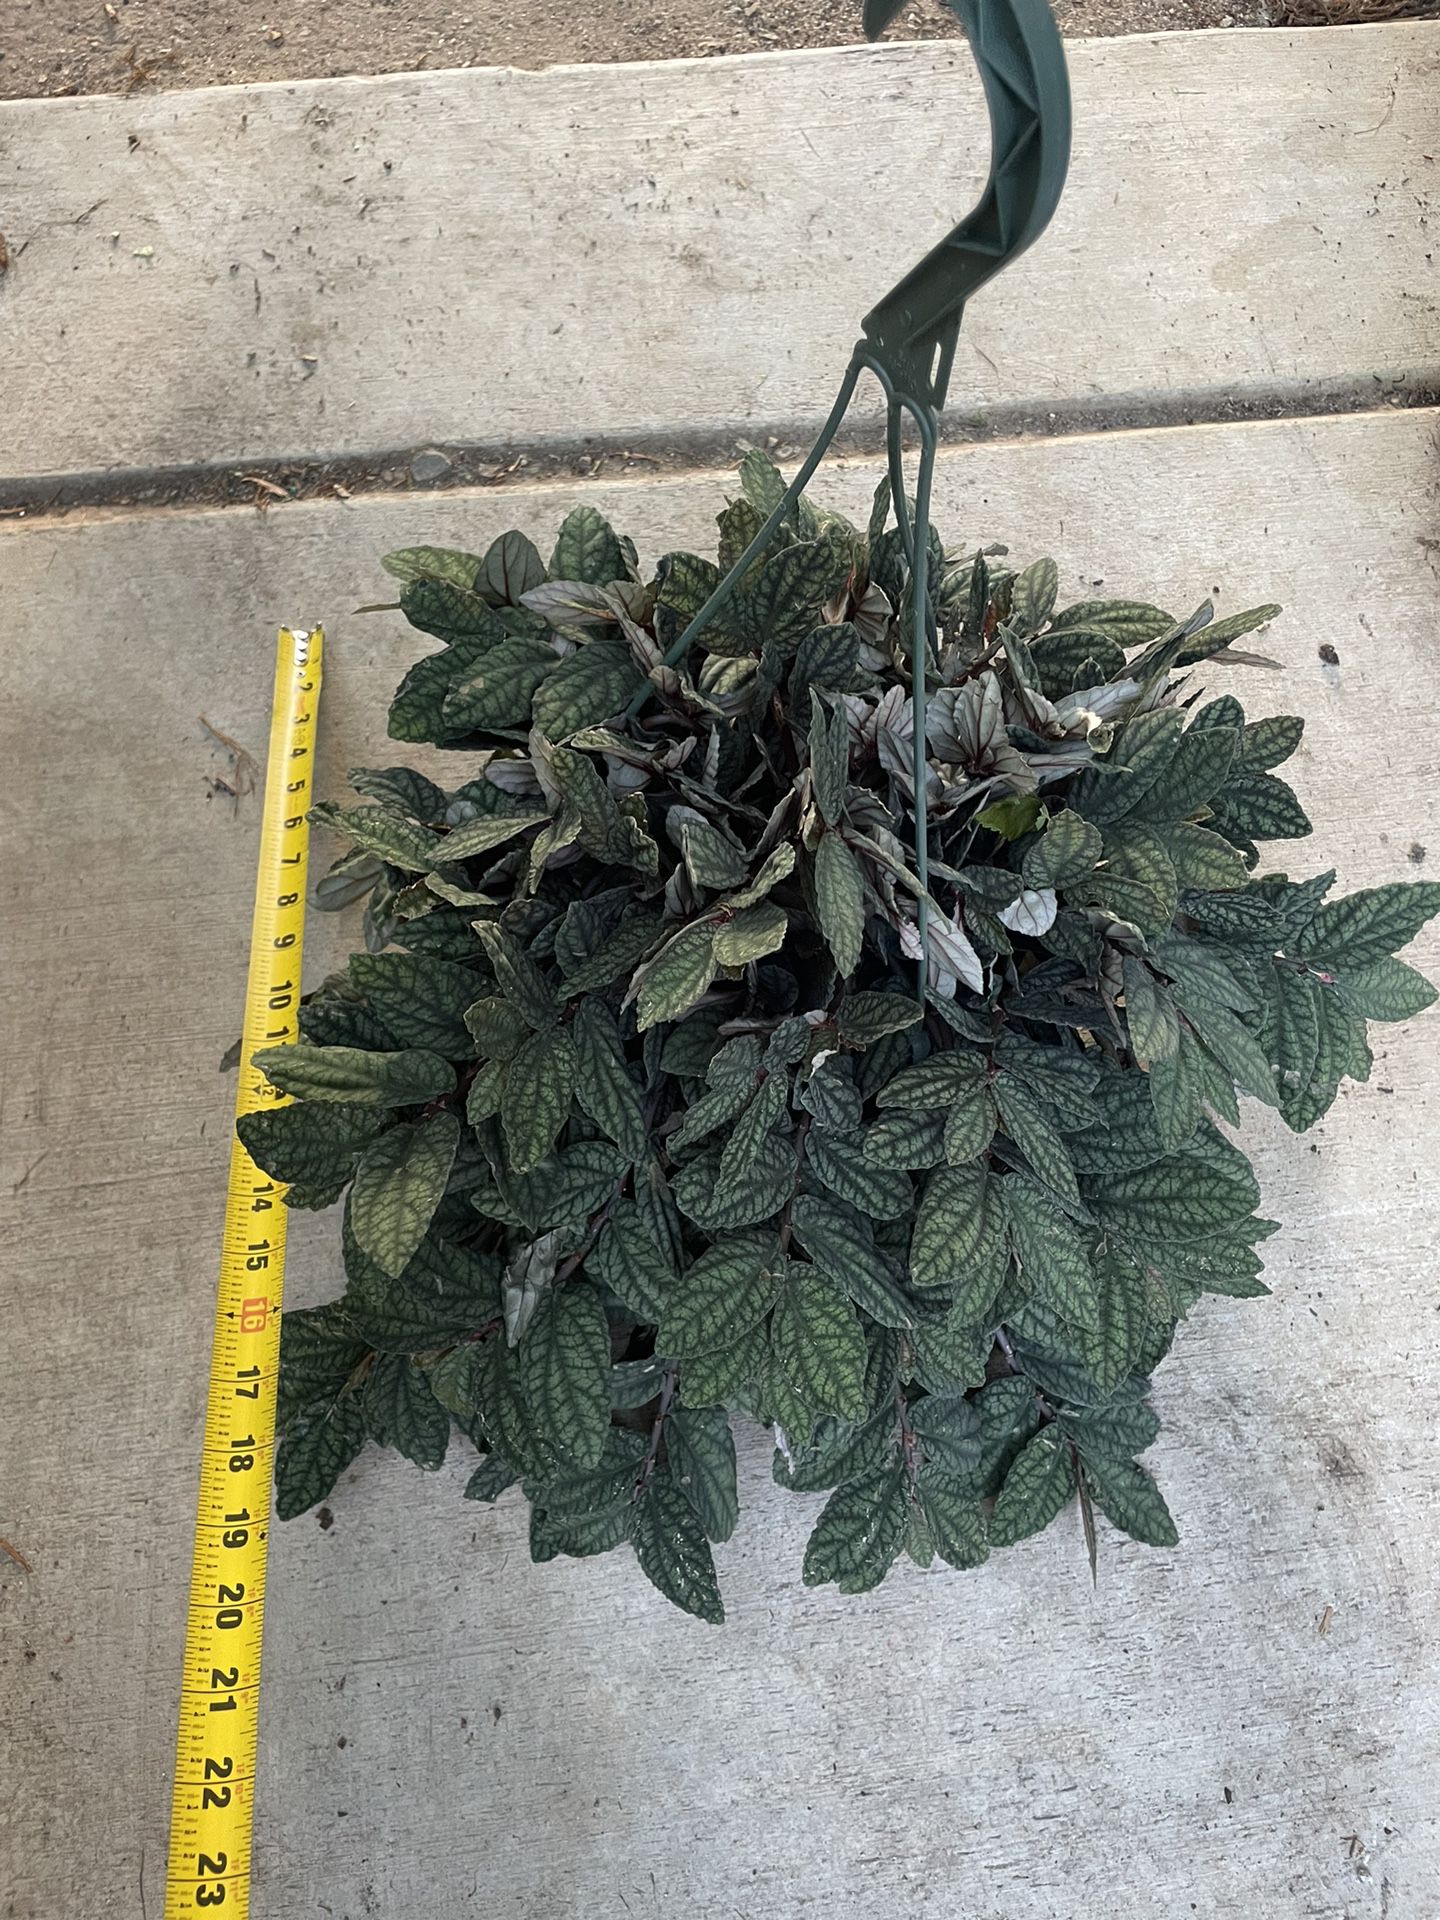 8” pot super healthy indoor plant; big/full/lush watermelon begonia,exact plant, now$40/was$60 95820